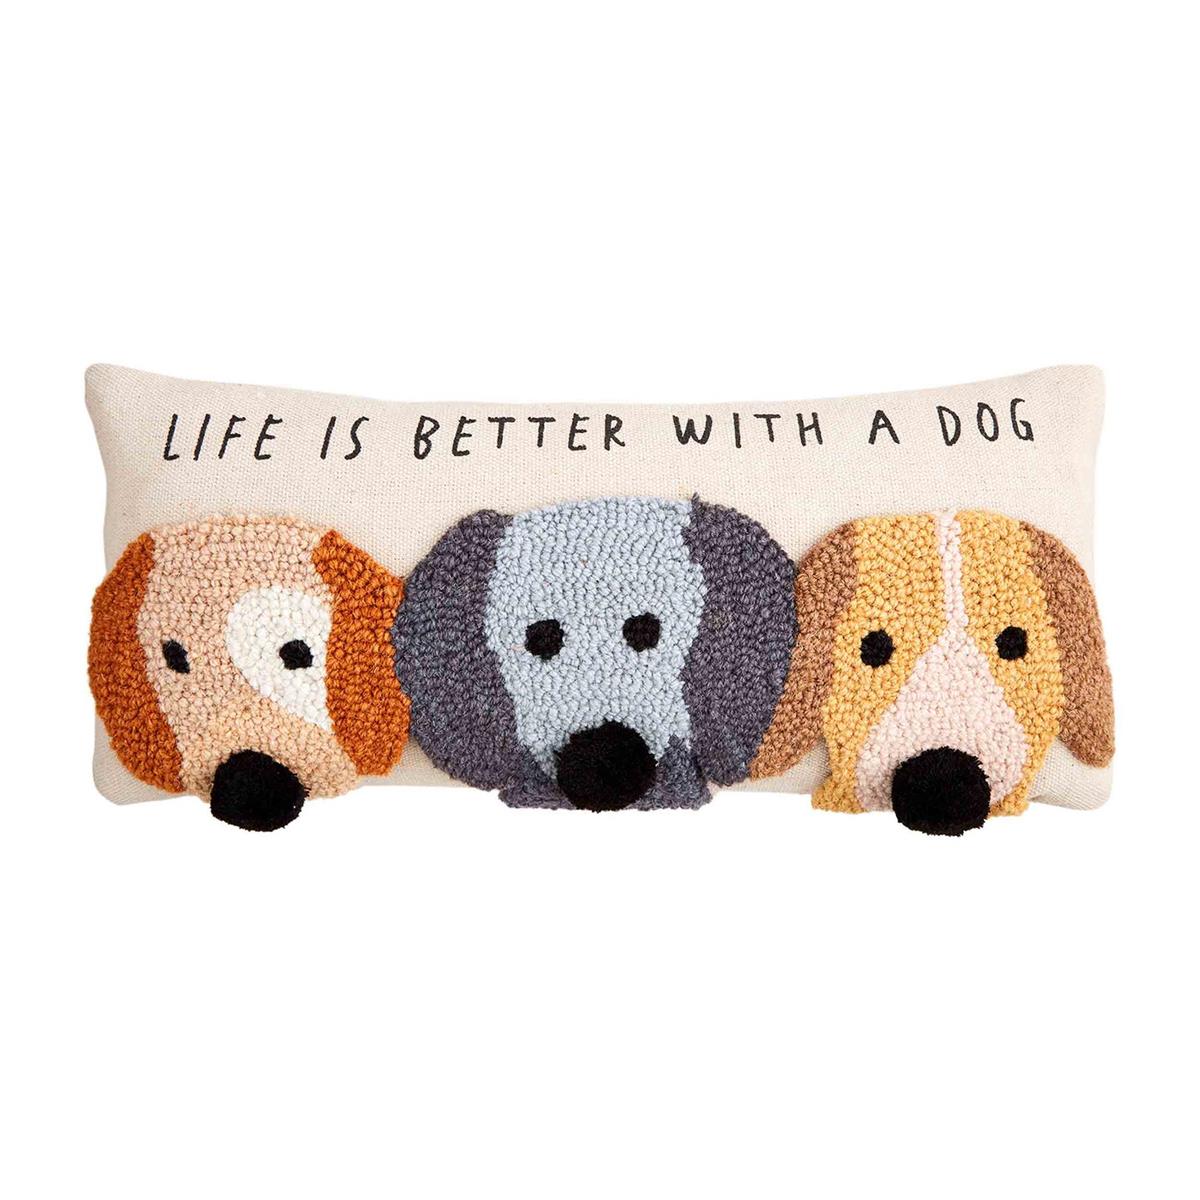 cream colored pillow with 3 dog face and text "life is better with a dog" on it.